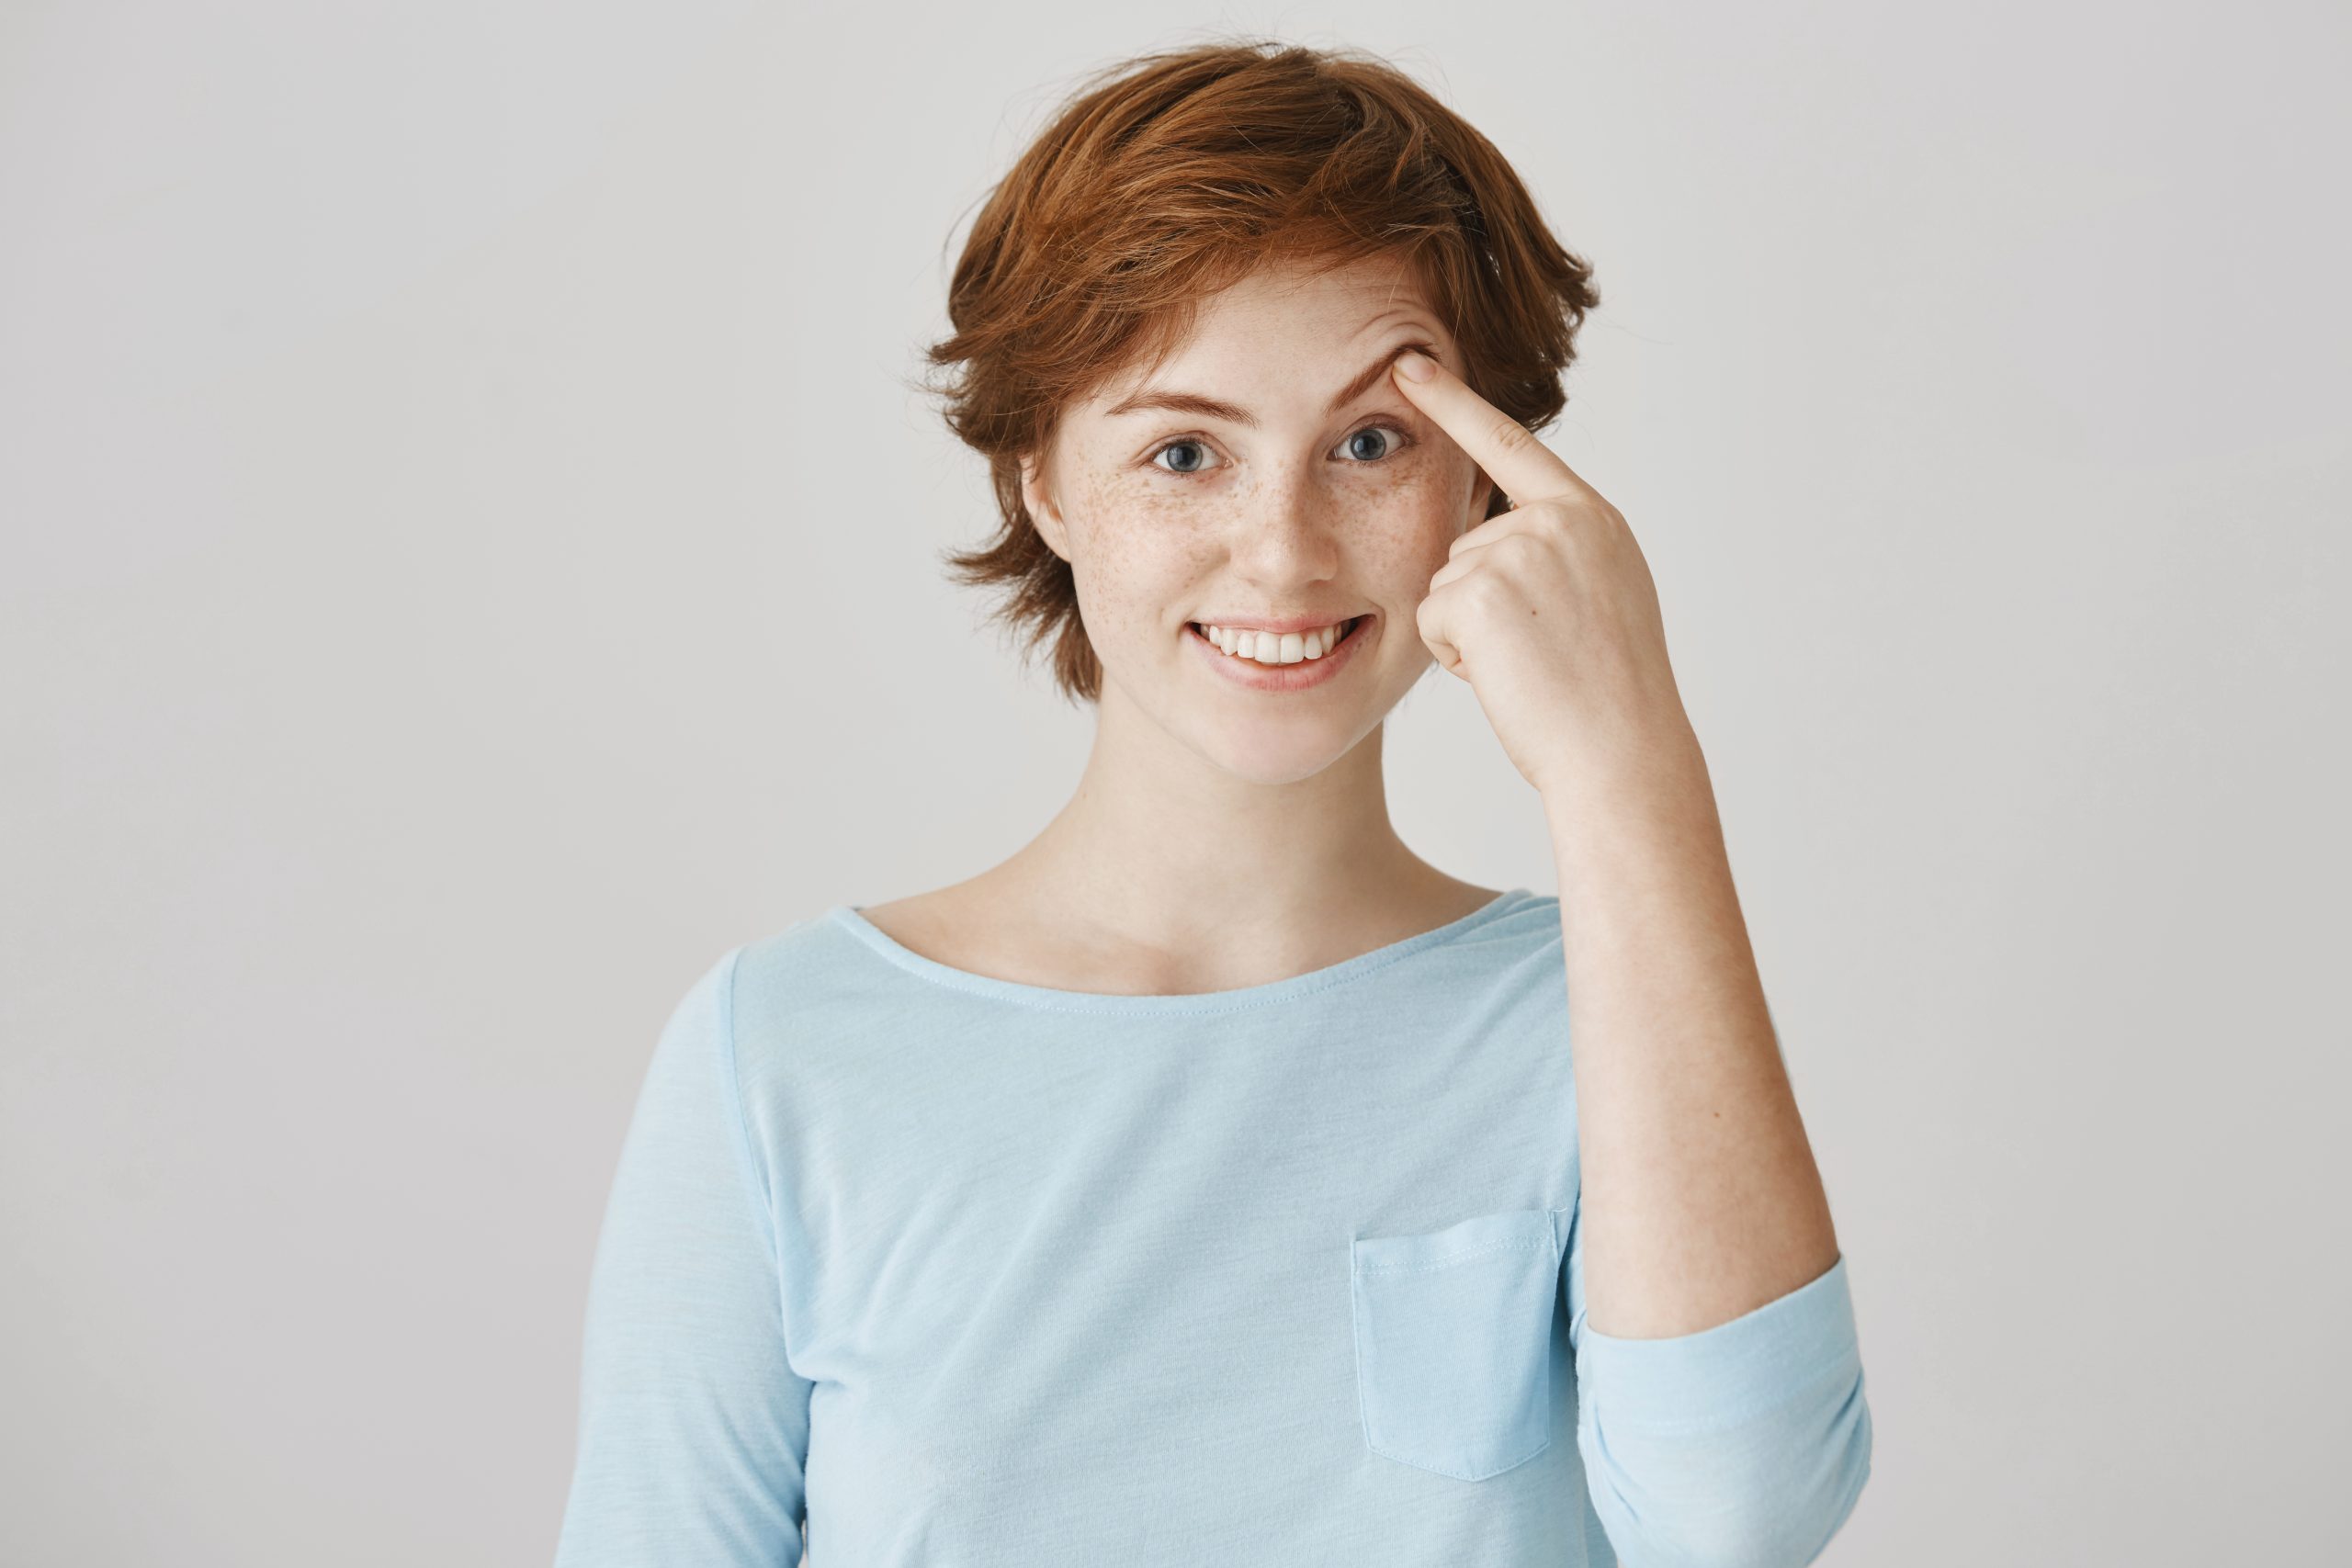 Girl can not lift her eyebrow without help of hand. Portrait of happy attractive redhead female student with freckles in ordinary clothes pulling brow with index finger, smiling and being in good mood